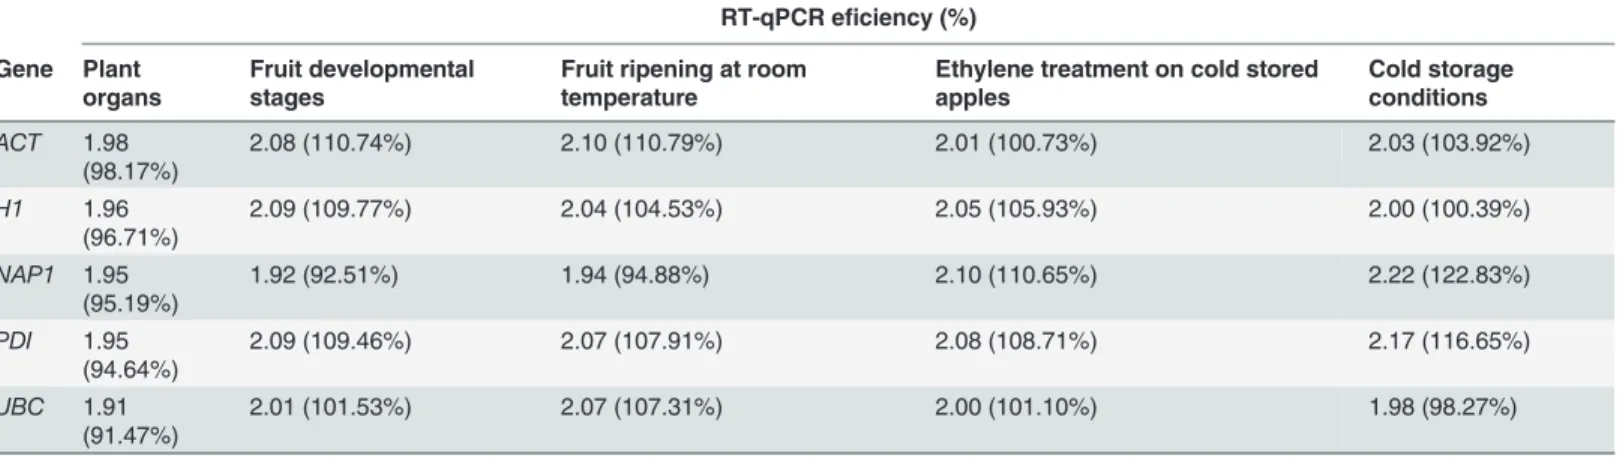 Table 2. Efﬁciency of primer pairs used for RT-qPCR ampliﬁcation in each experiment.